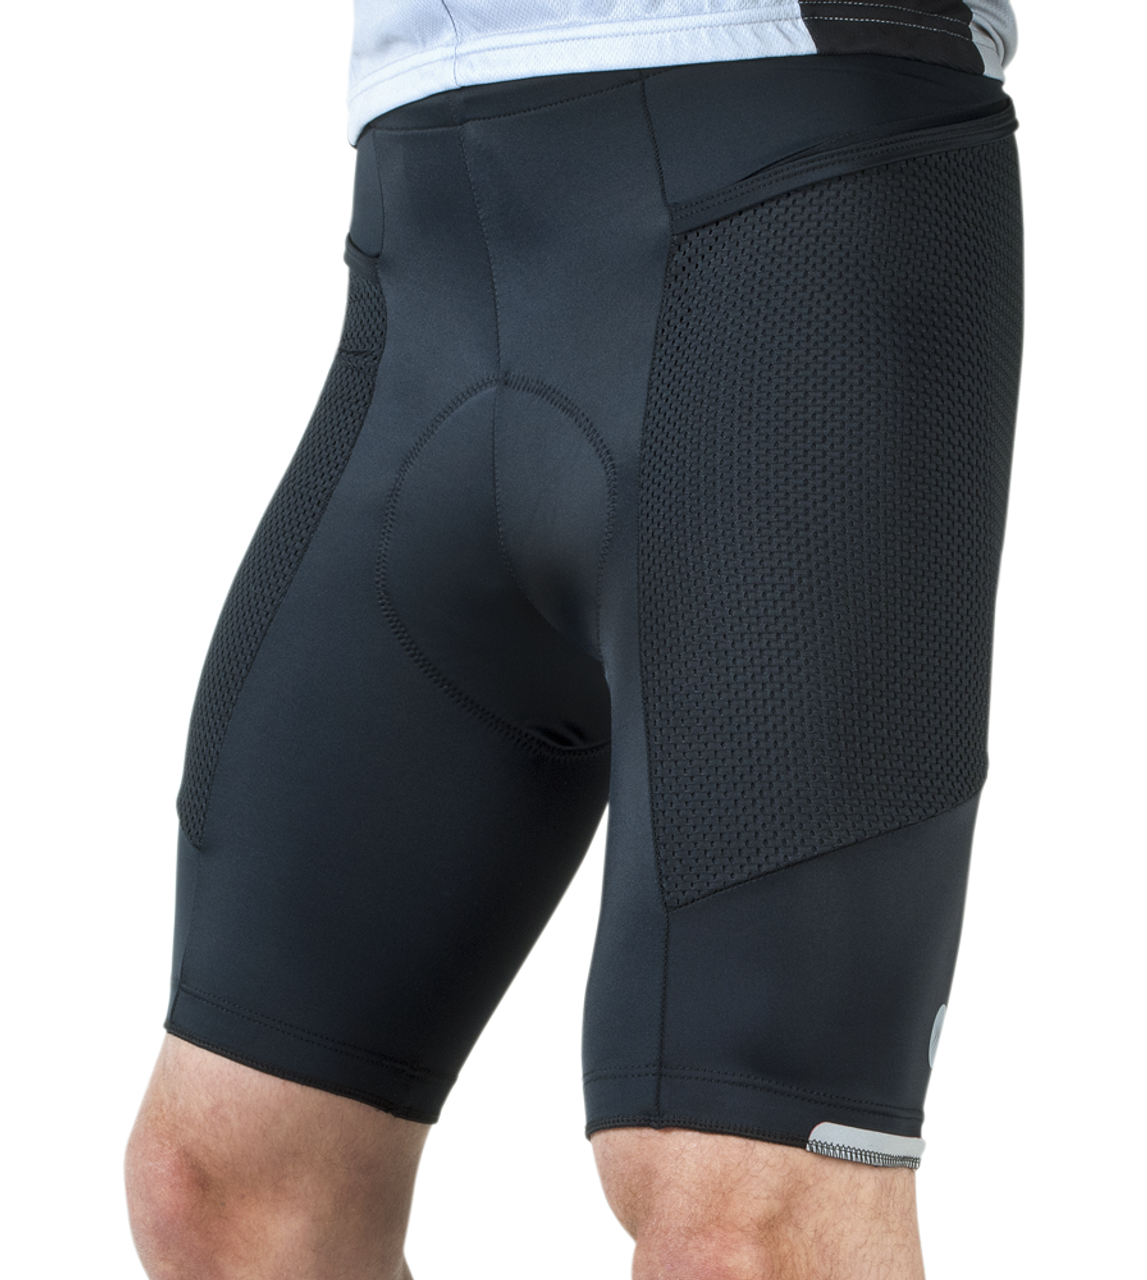 Men's Gel cycling shorts, bike shorts with side pockets - Black on Yellow